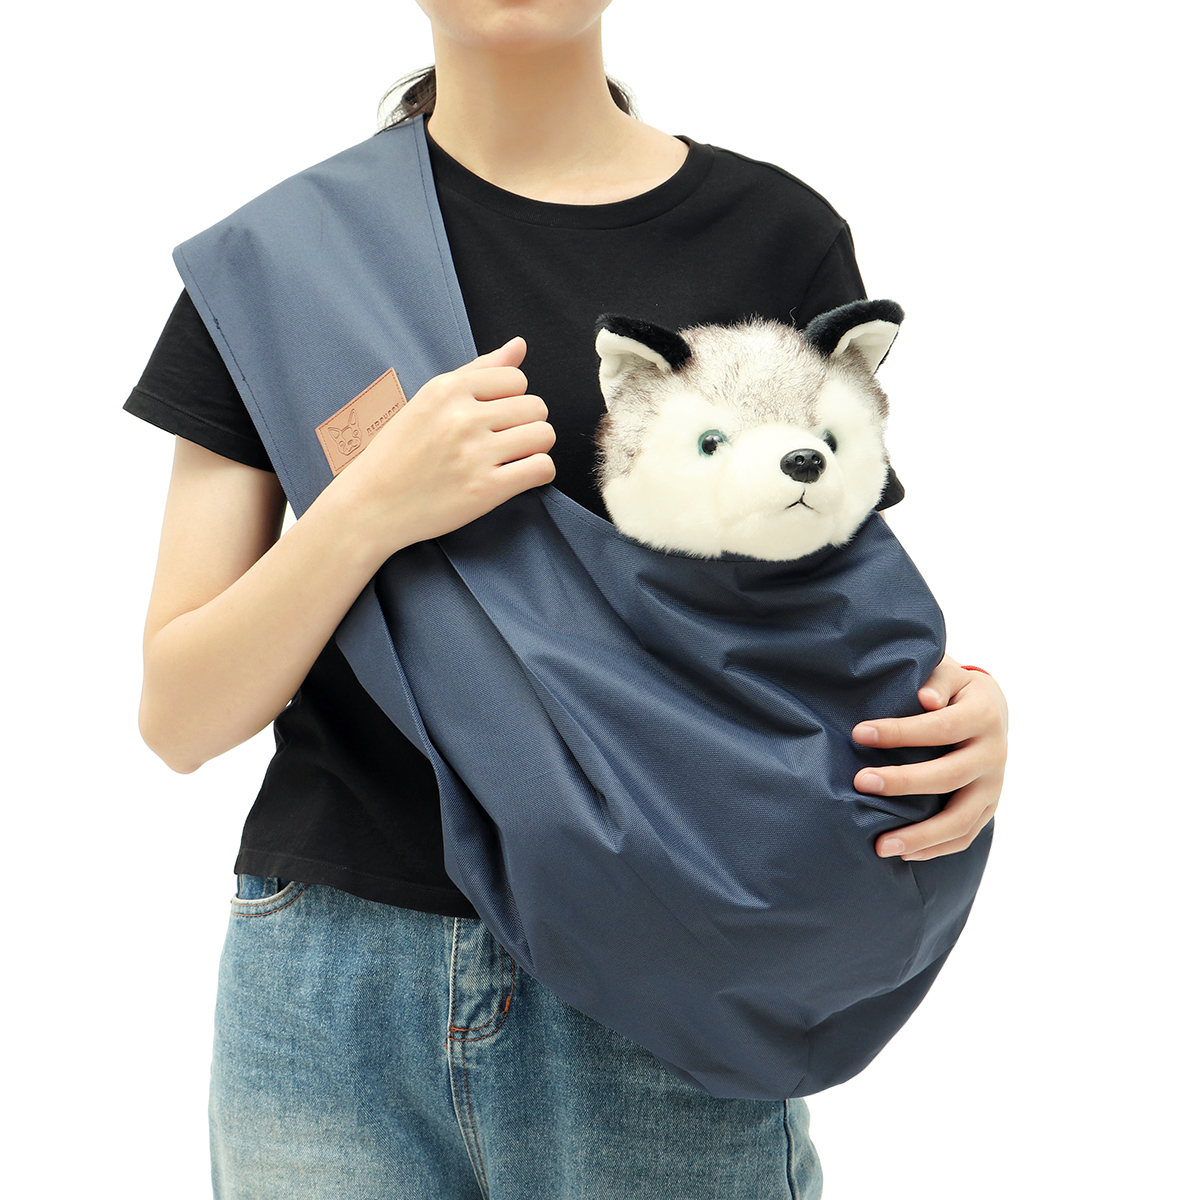 SmallLarge-Pet-Sling-Carrier-Bag-Tote-Shoulder-Dog-Puppy-Cat-Pouch-Outdoor-Pet-Supply-1718756-11